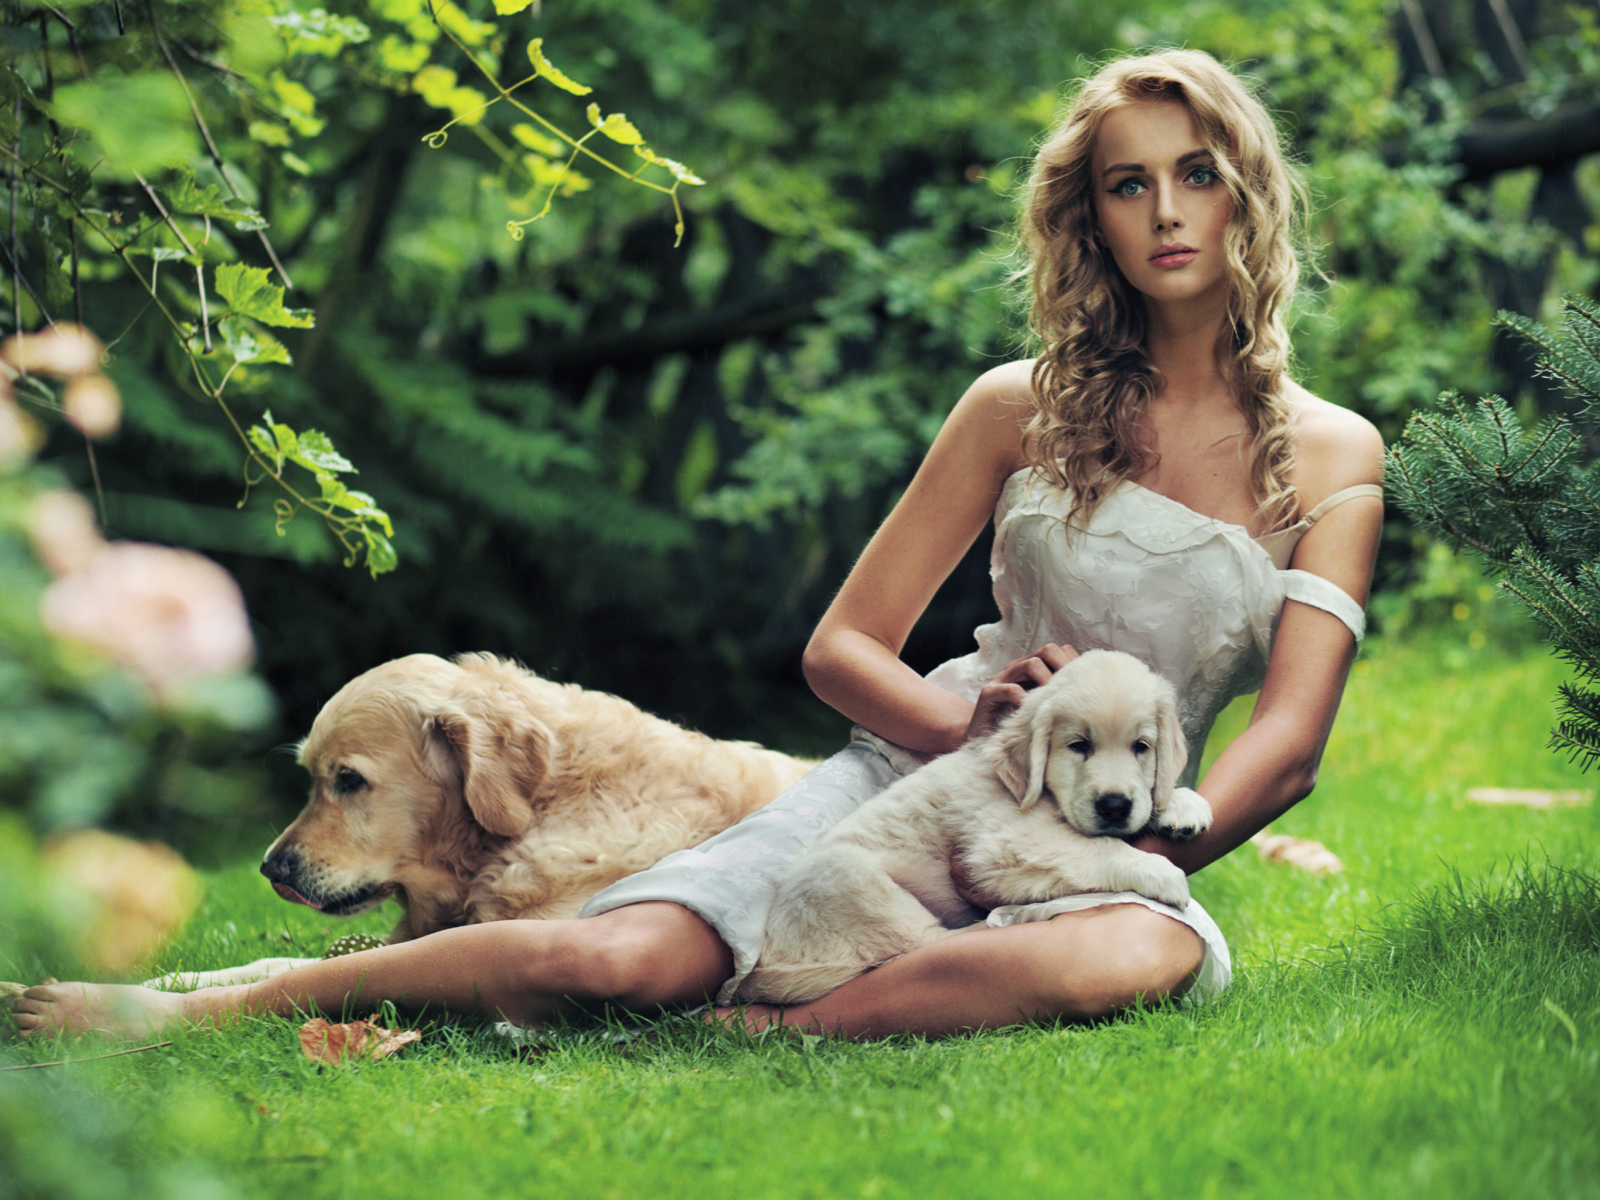 Model And Dogs wallpaper 1600x1200